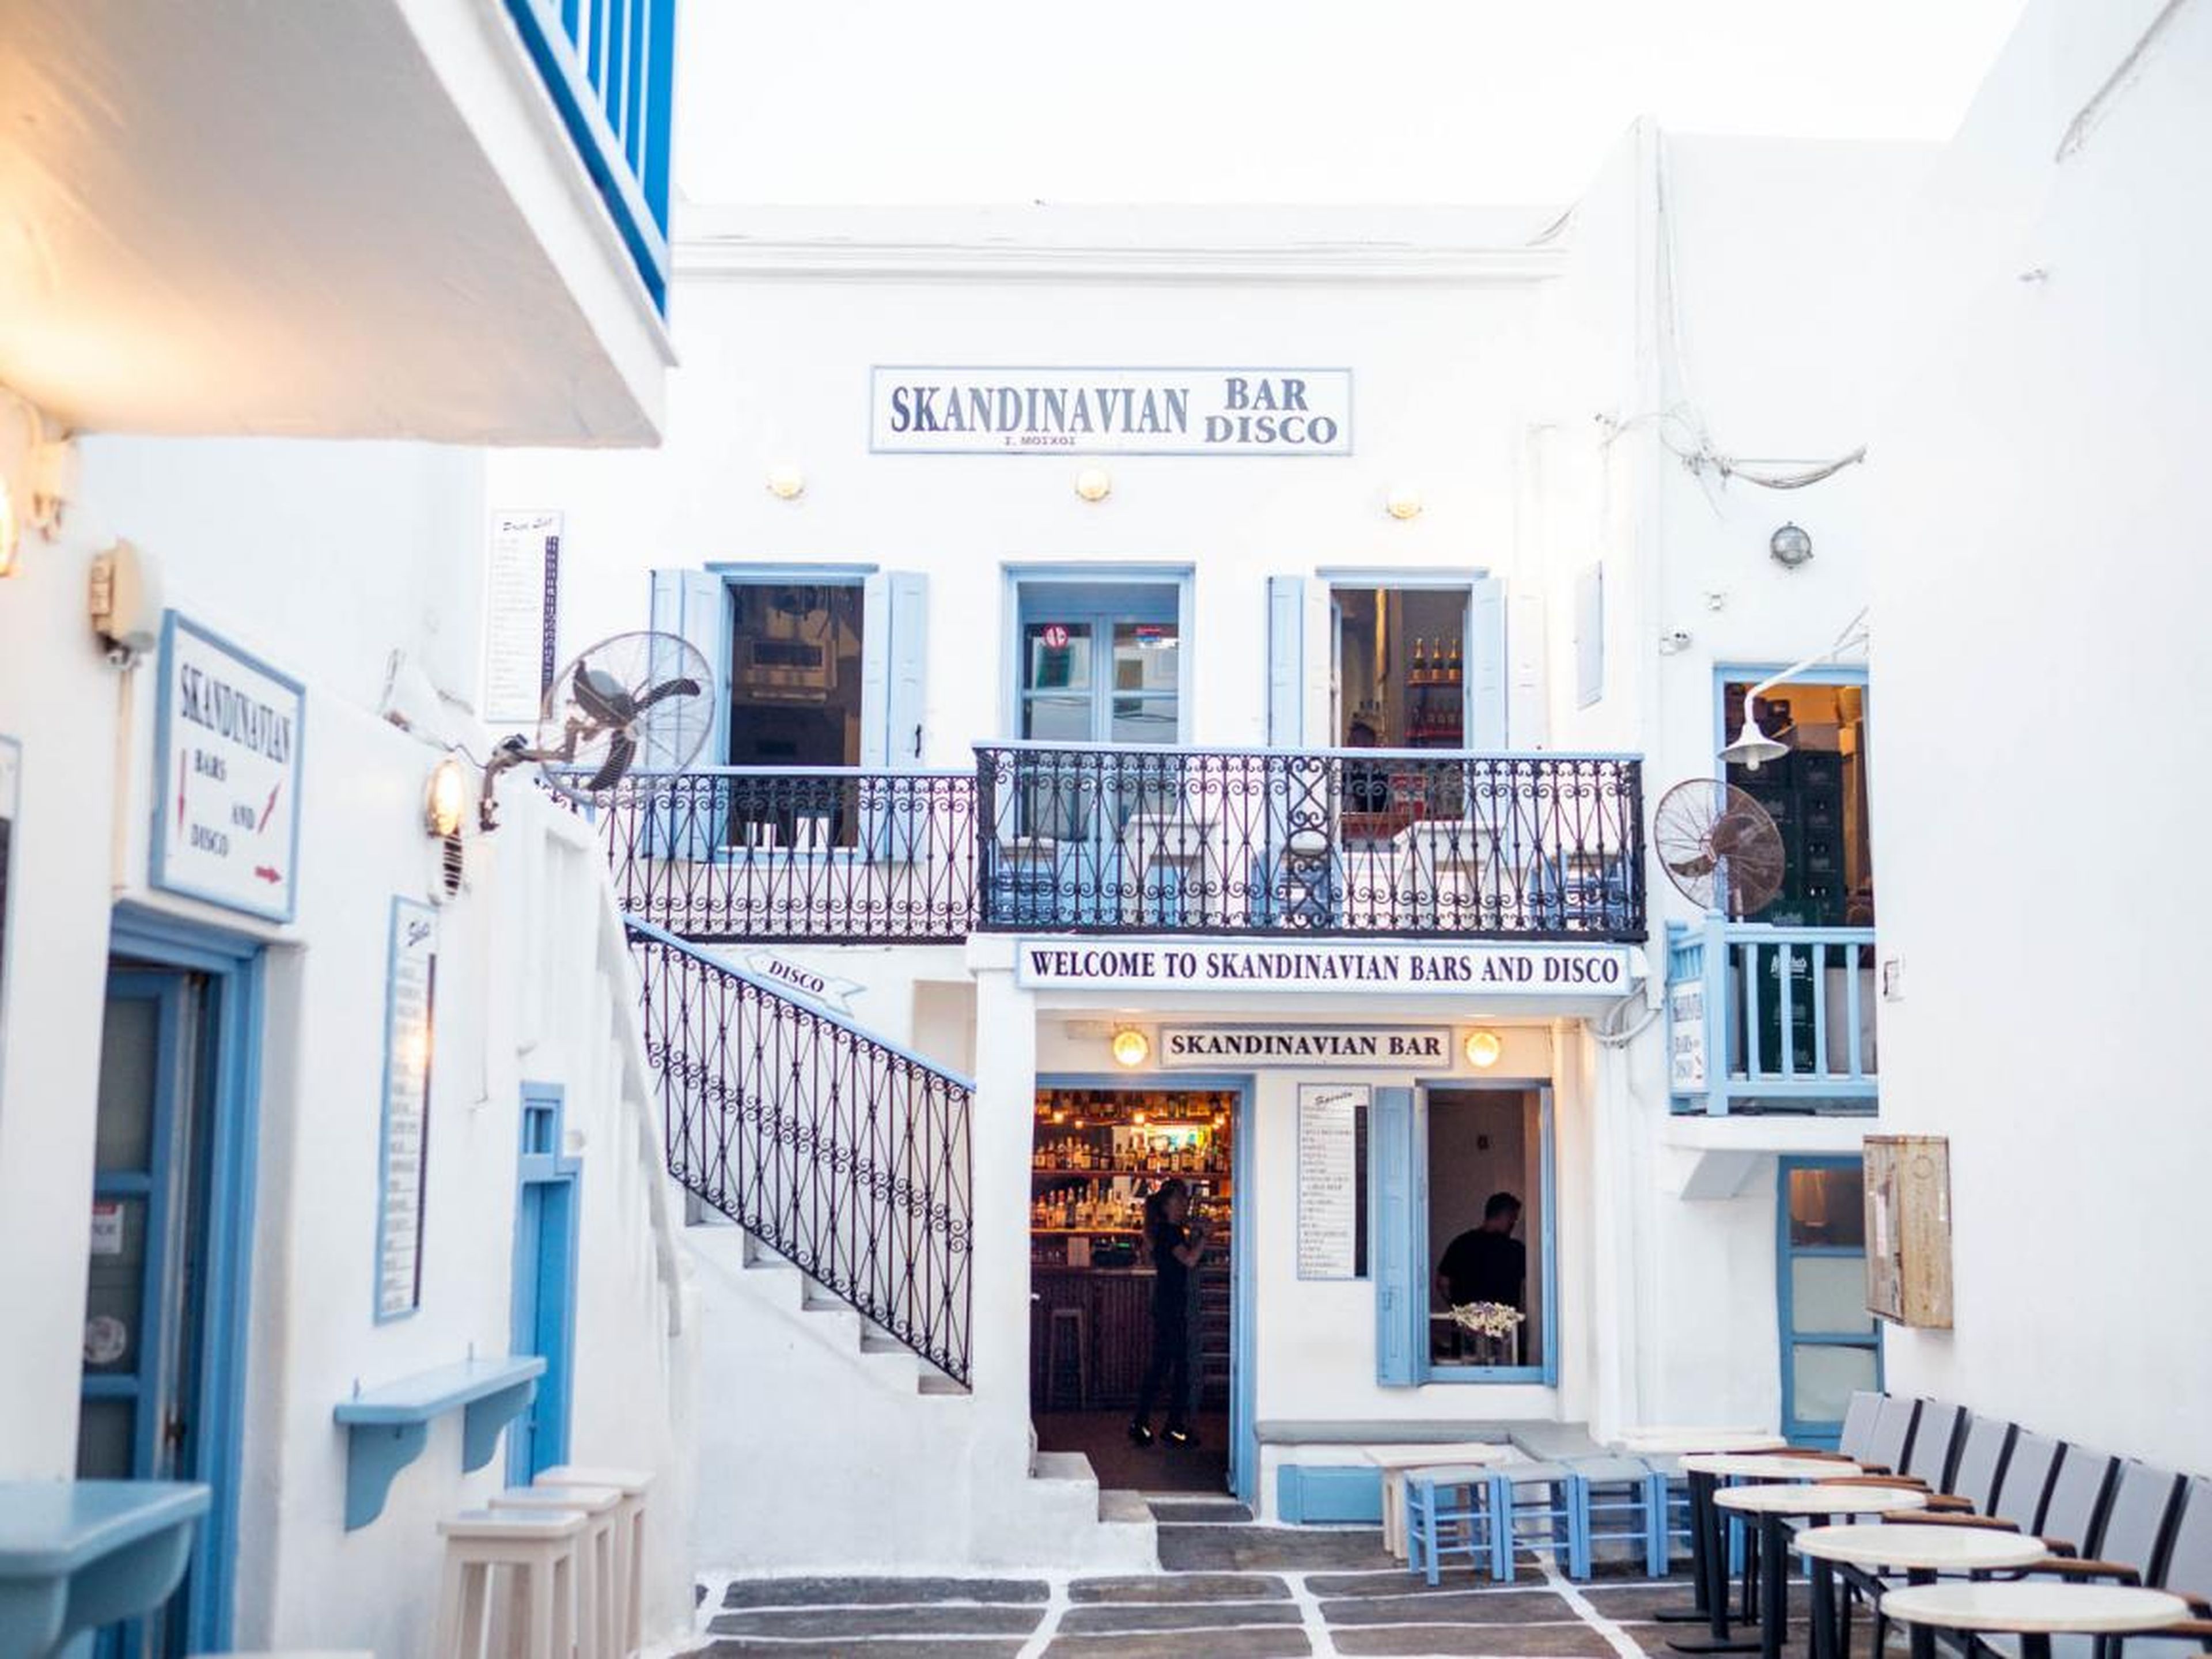 Mykonos' nightlife is known for being intense, going deep into the night. It's mostly focused around bars like Skandinavian Bar & Disco, a landmark spot on the island.